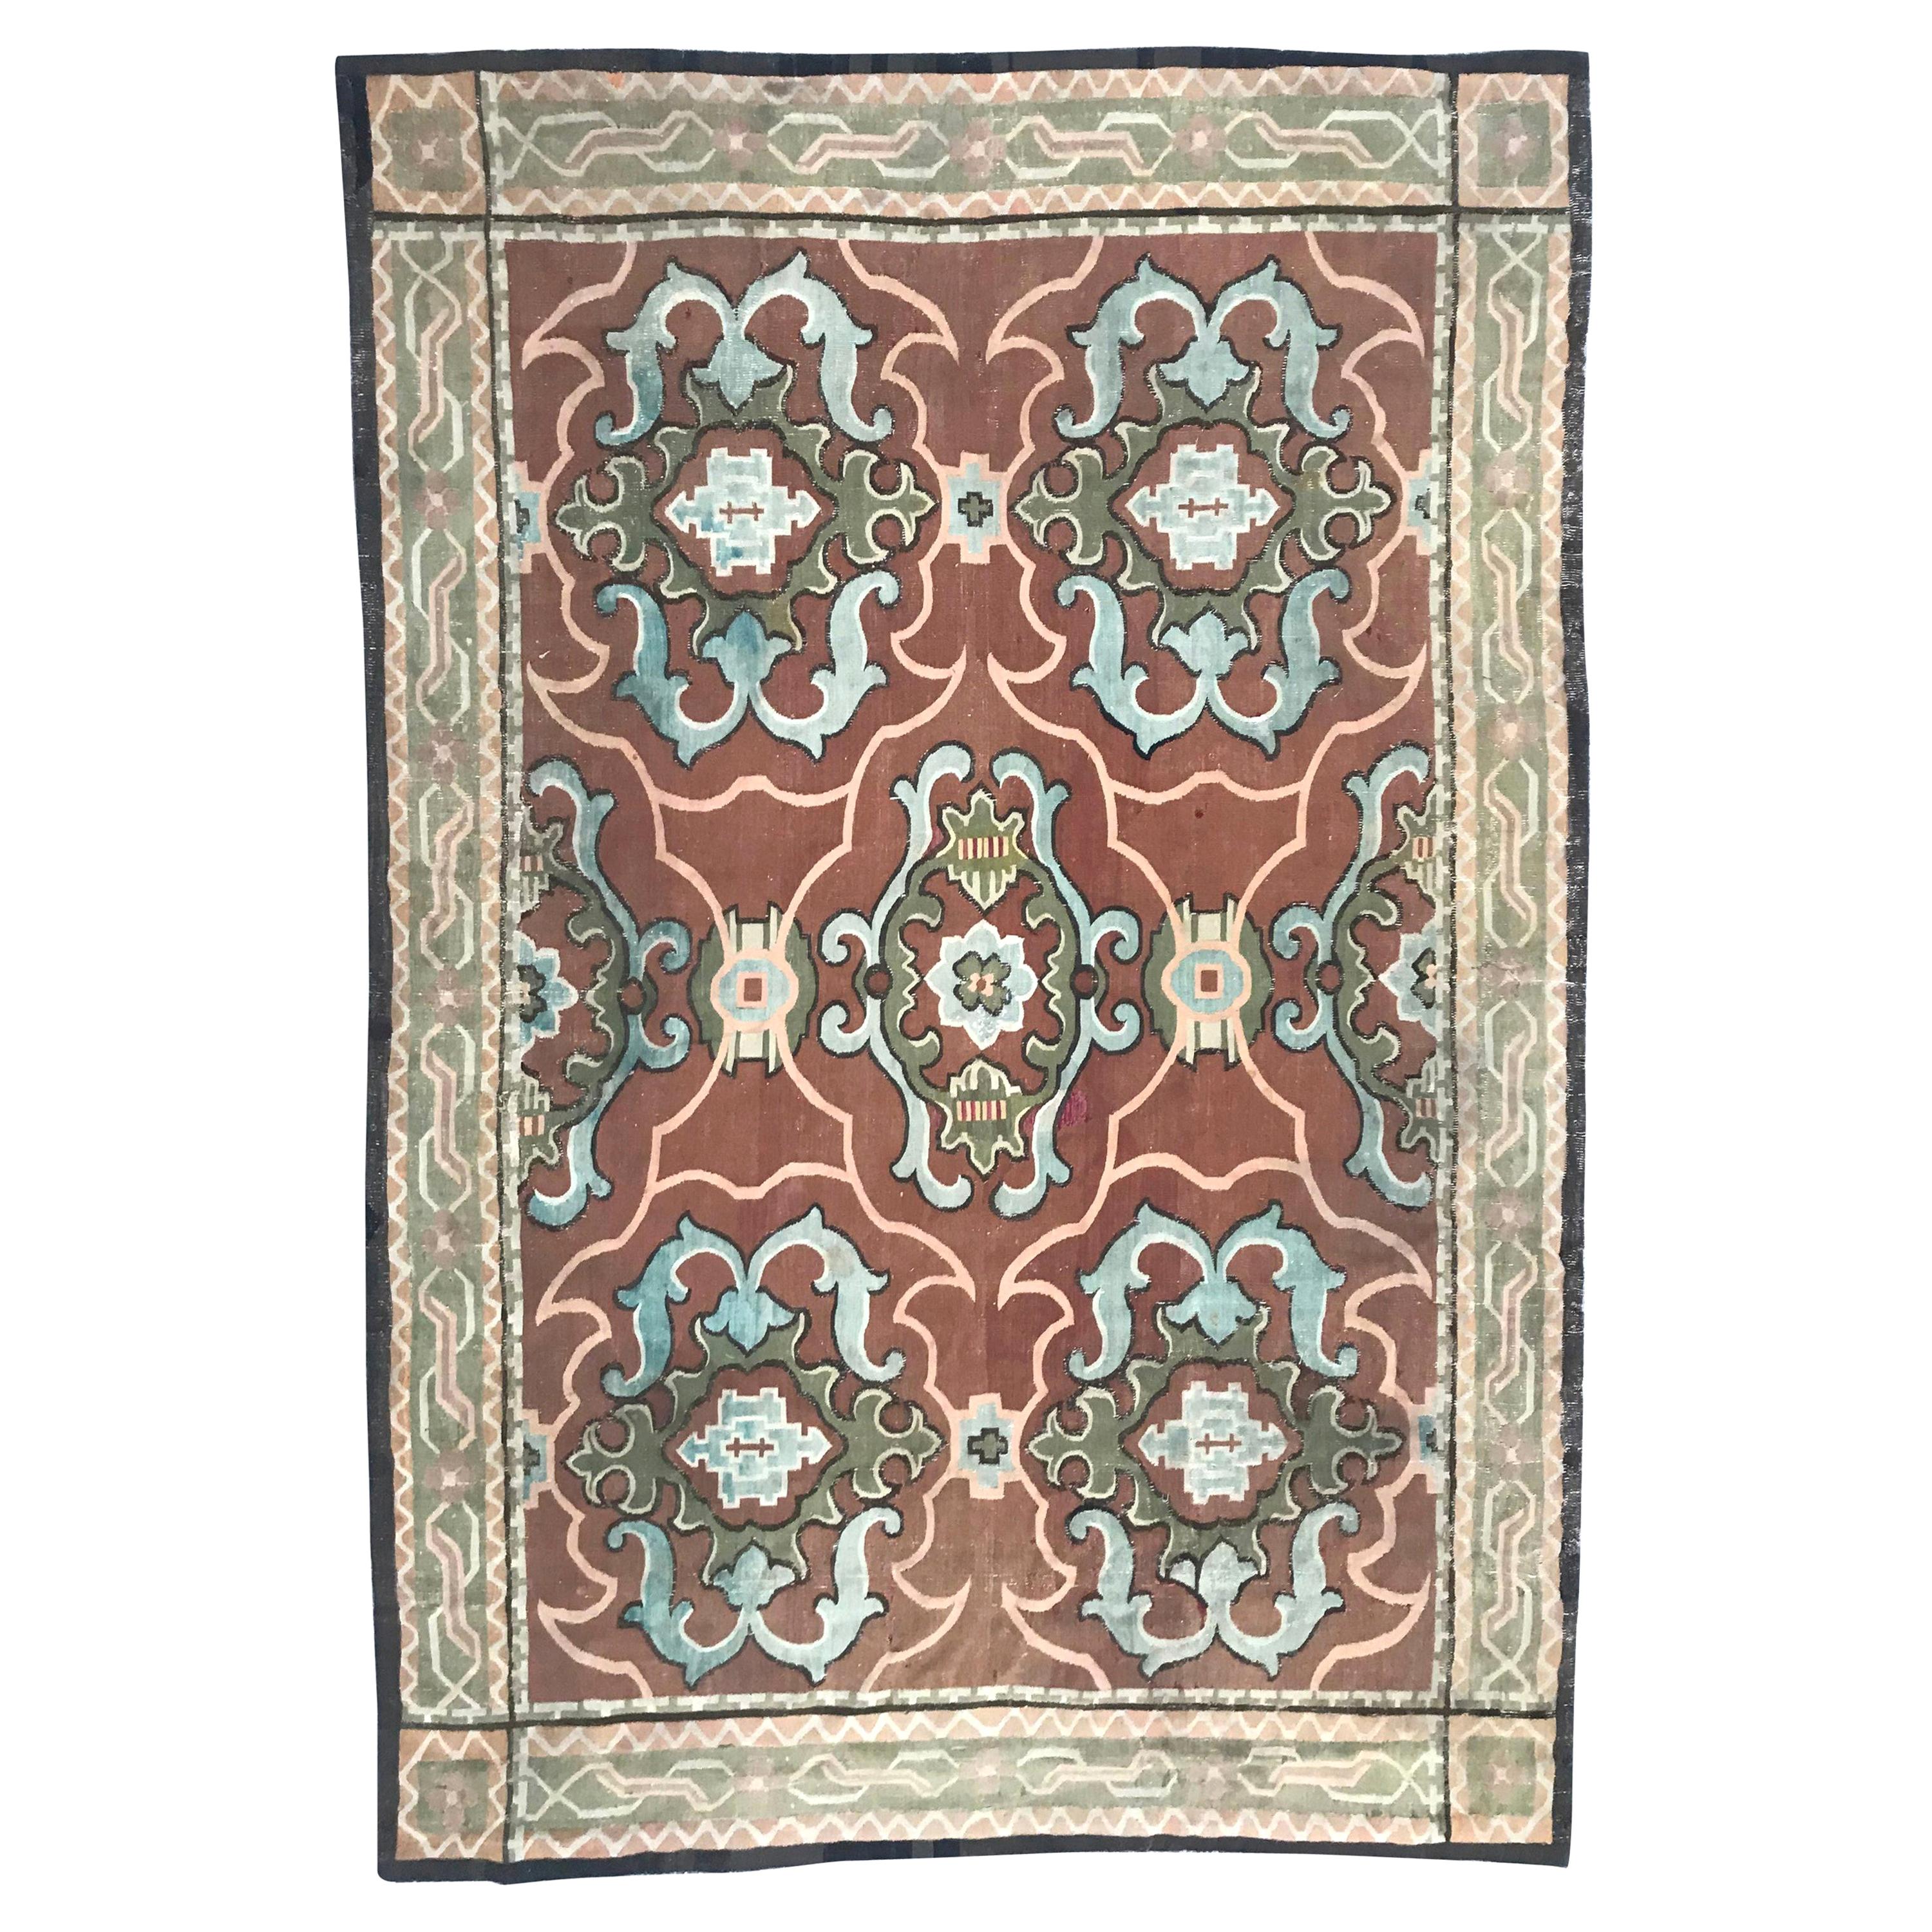 Bobyrug’s Antique 19th Century Aubusson Woven 18th Century Style Rug